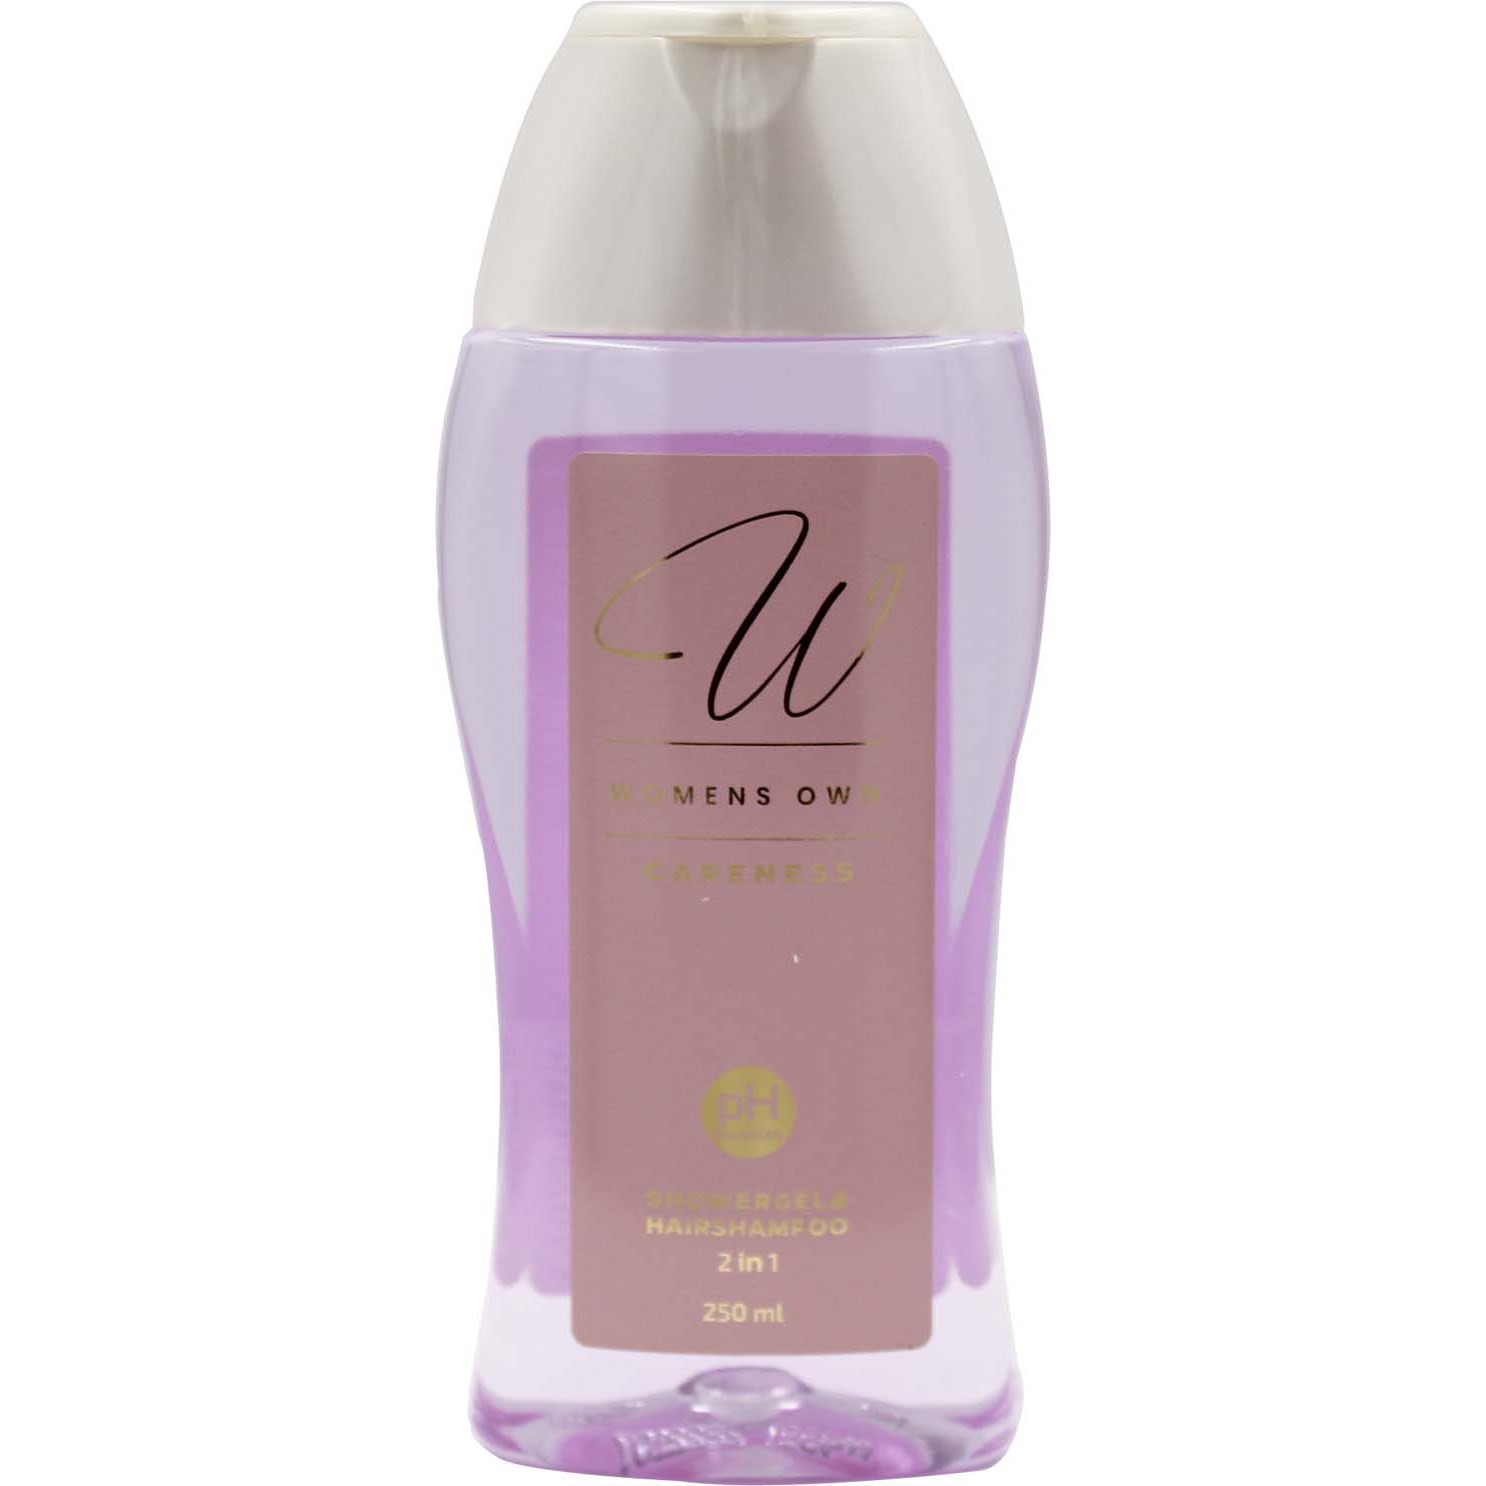 Läs mer om Womens Own Spring Collection 2-in-1 Shampoo & Showergel Careness 250 m